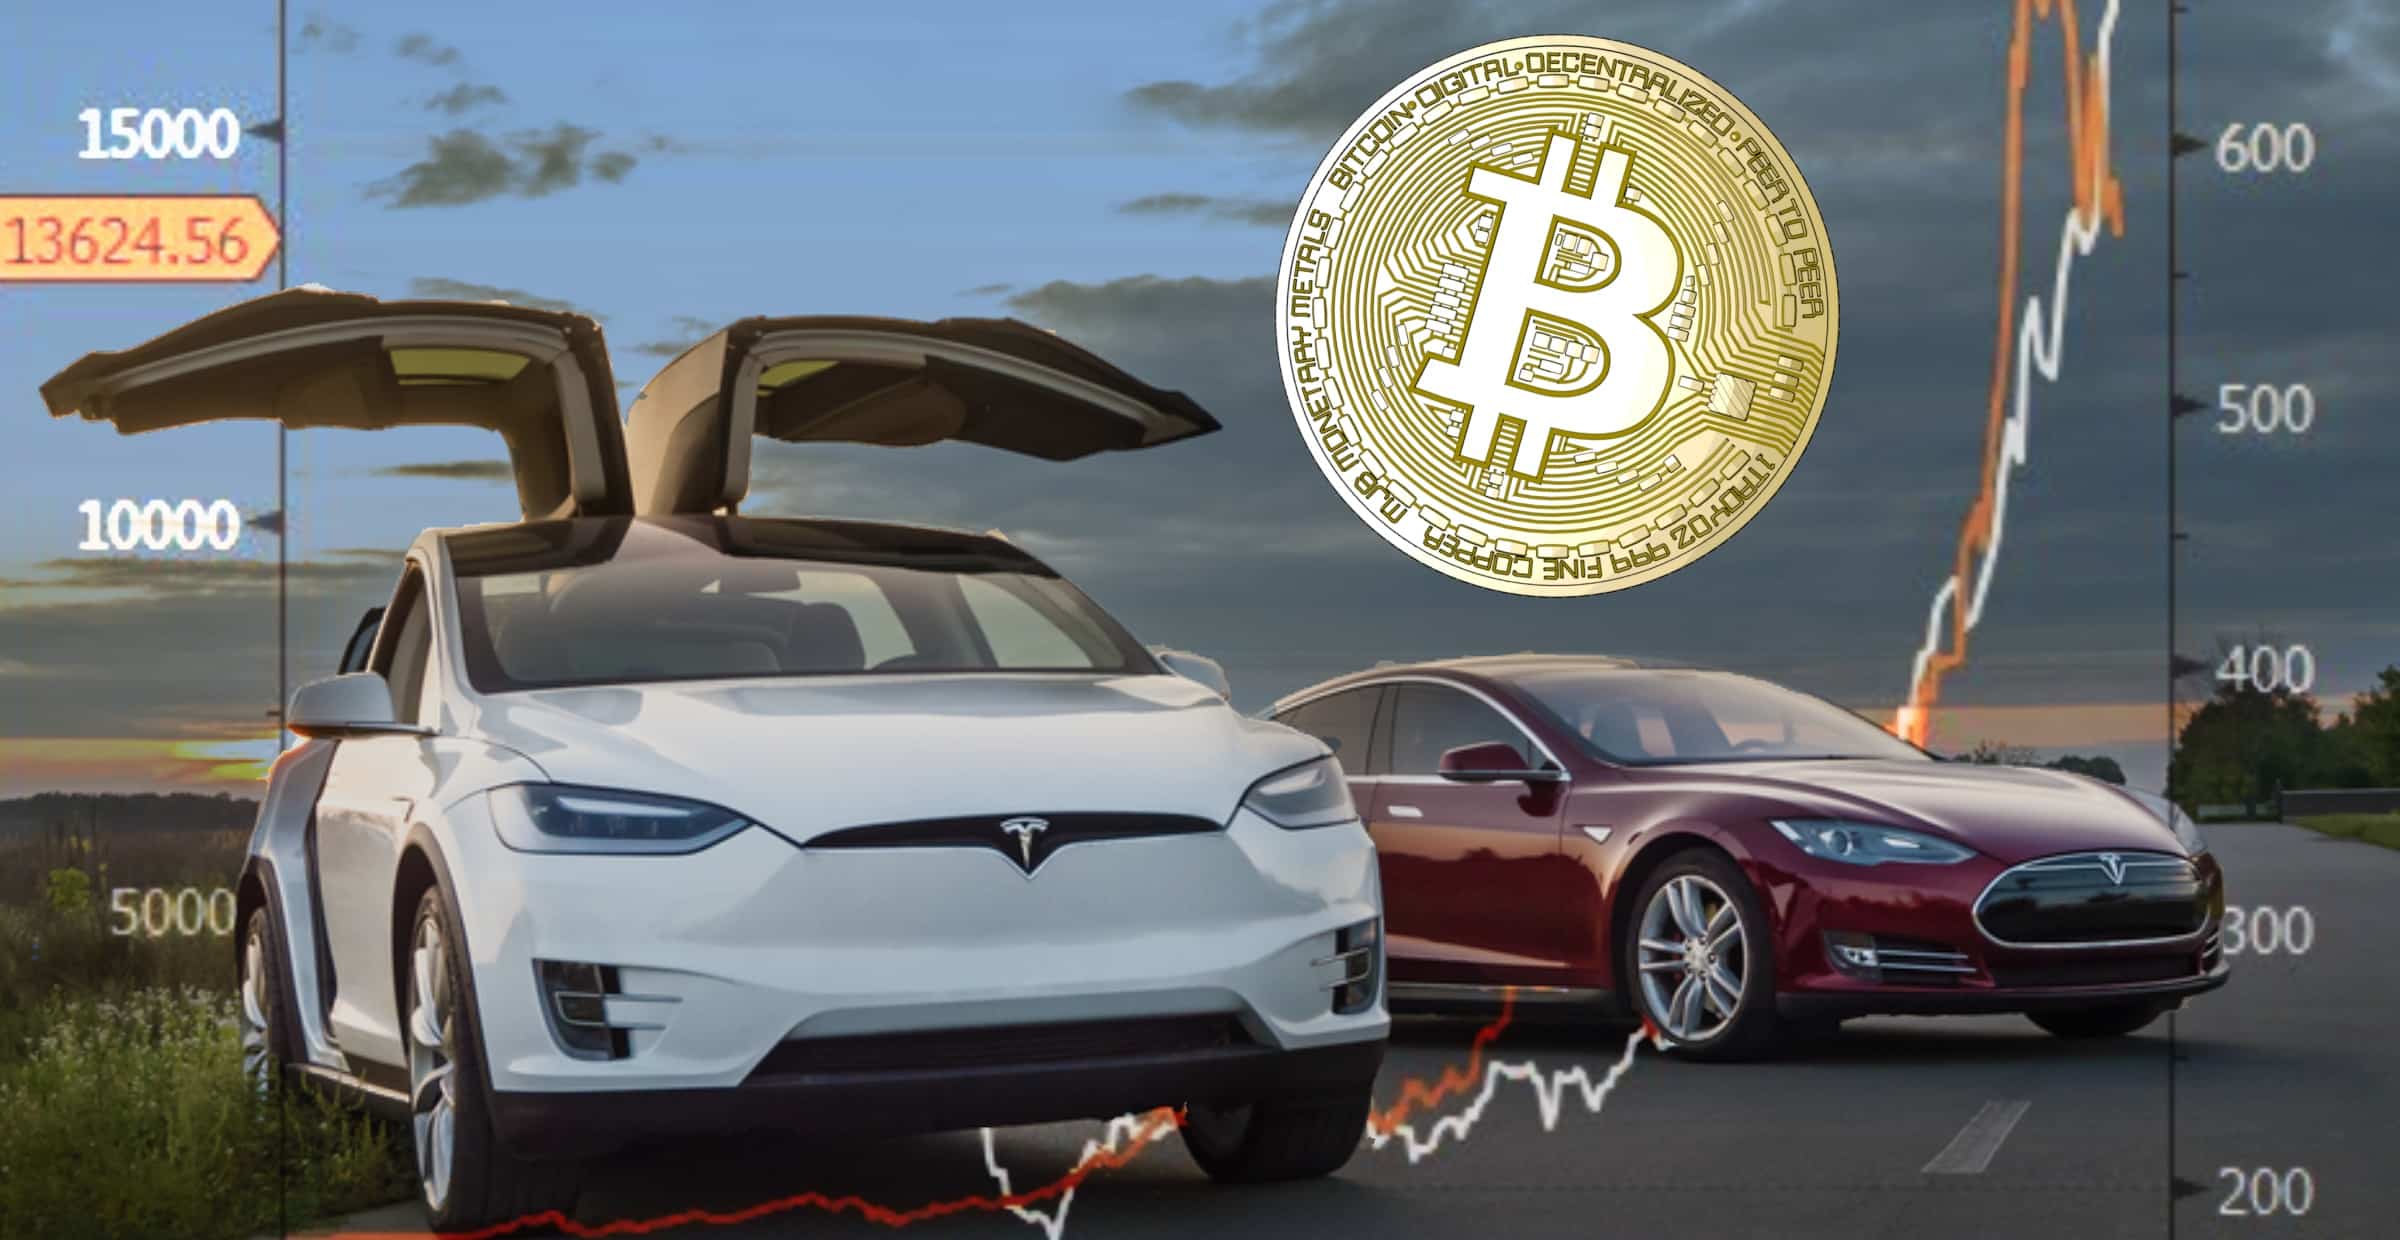 After huge increase – Tesla's share price looks just like bitcoin's mega rally in 2017